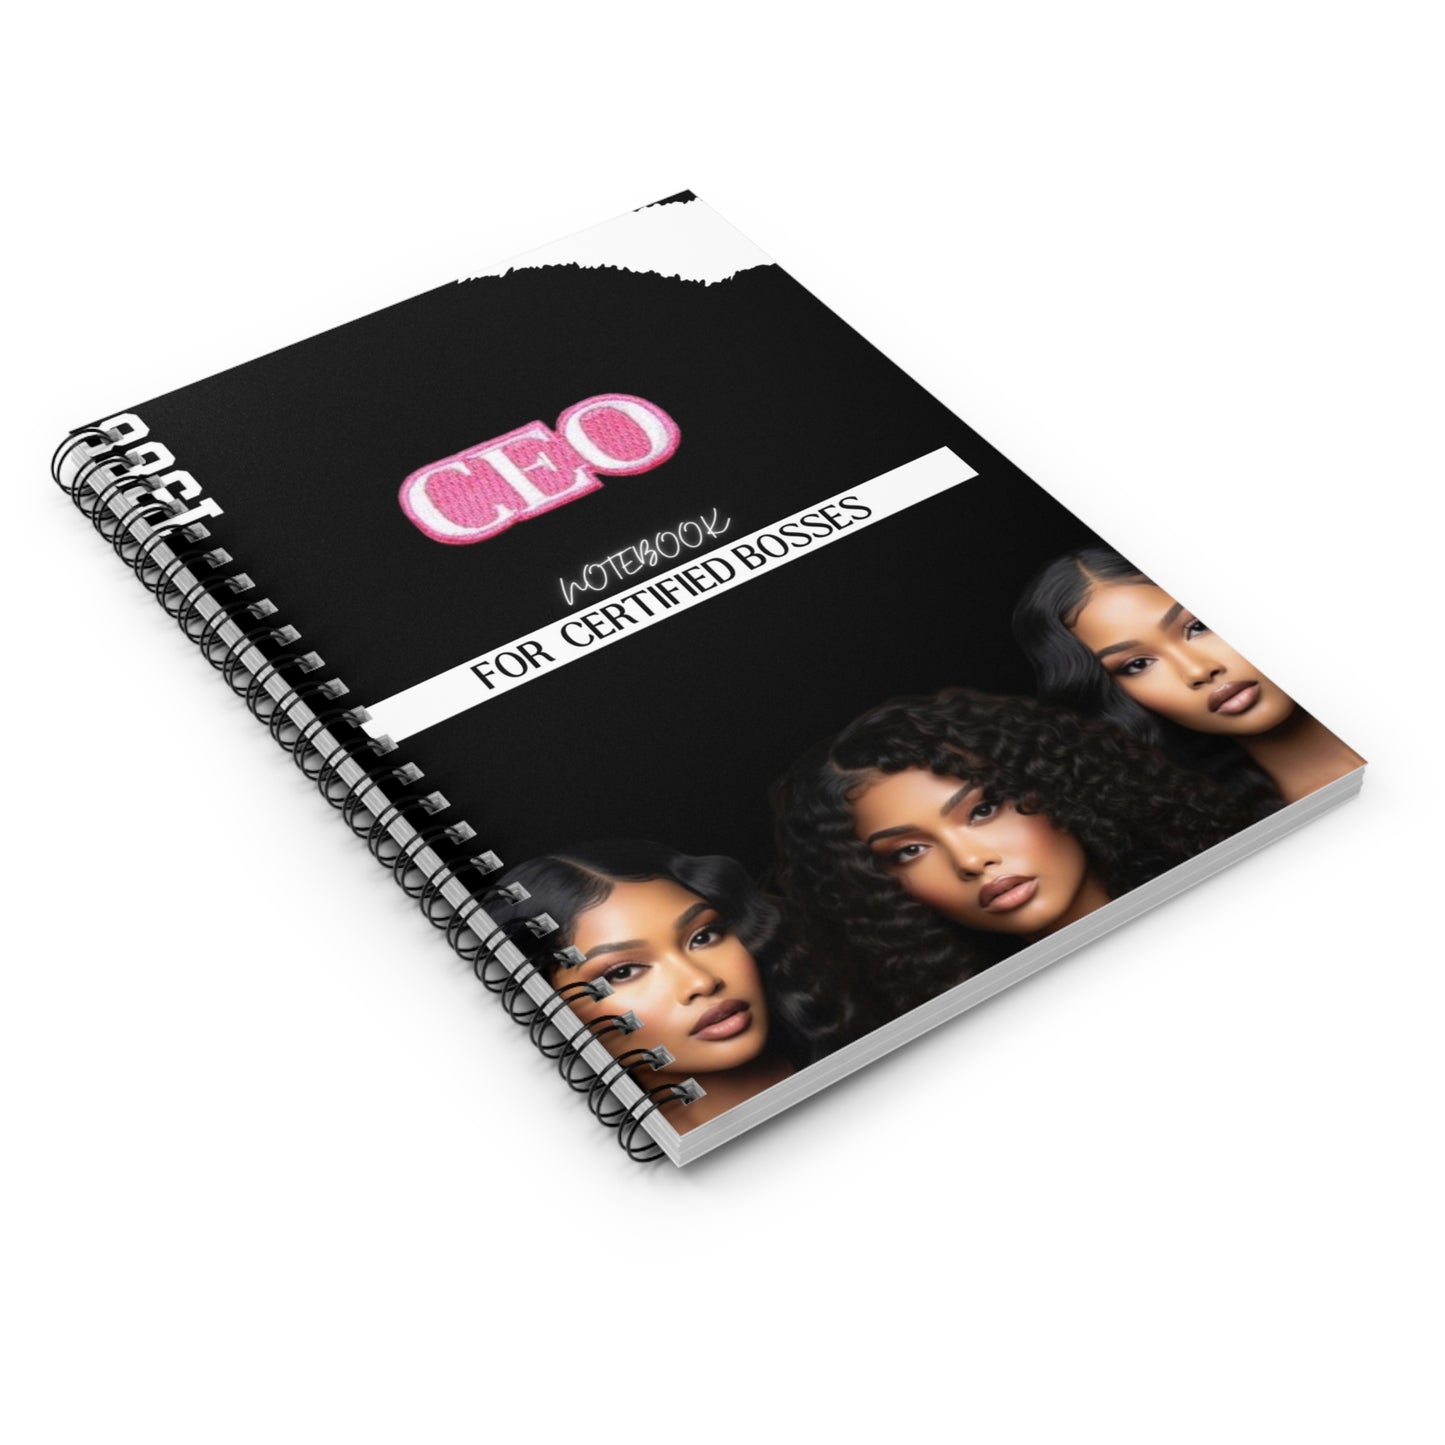 CEO OFFICIAL NOTEBOOK (PHYSICAL PRODUCT)